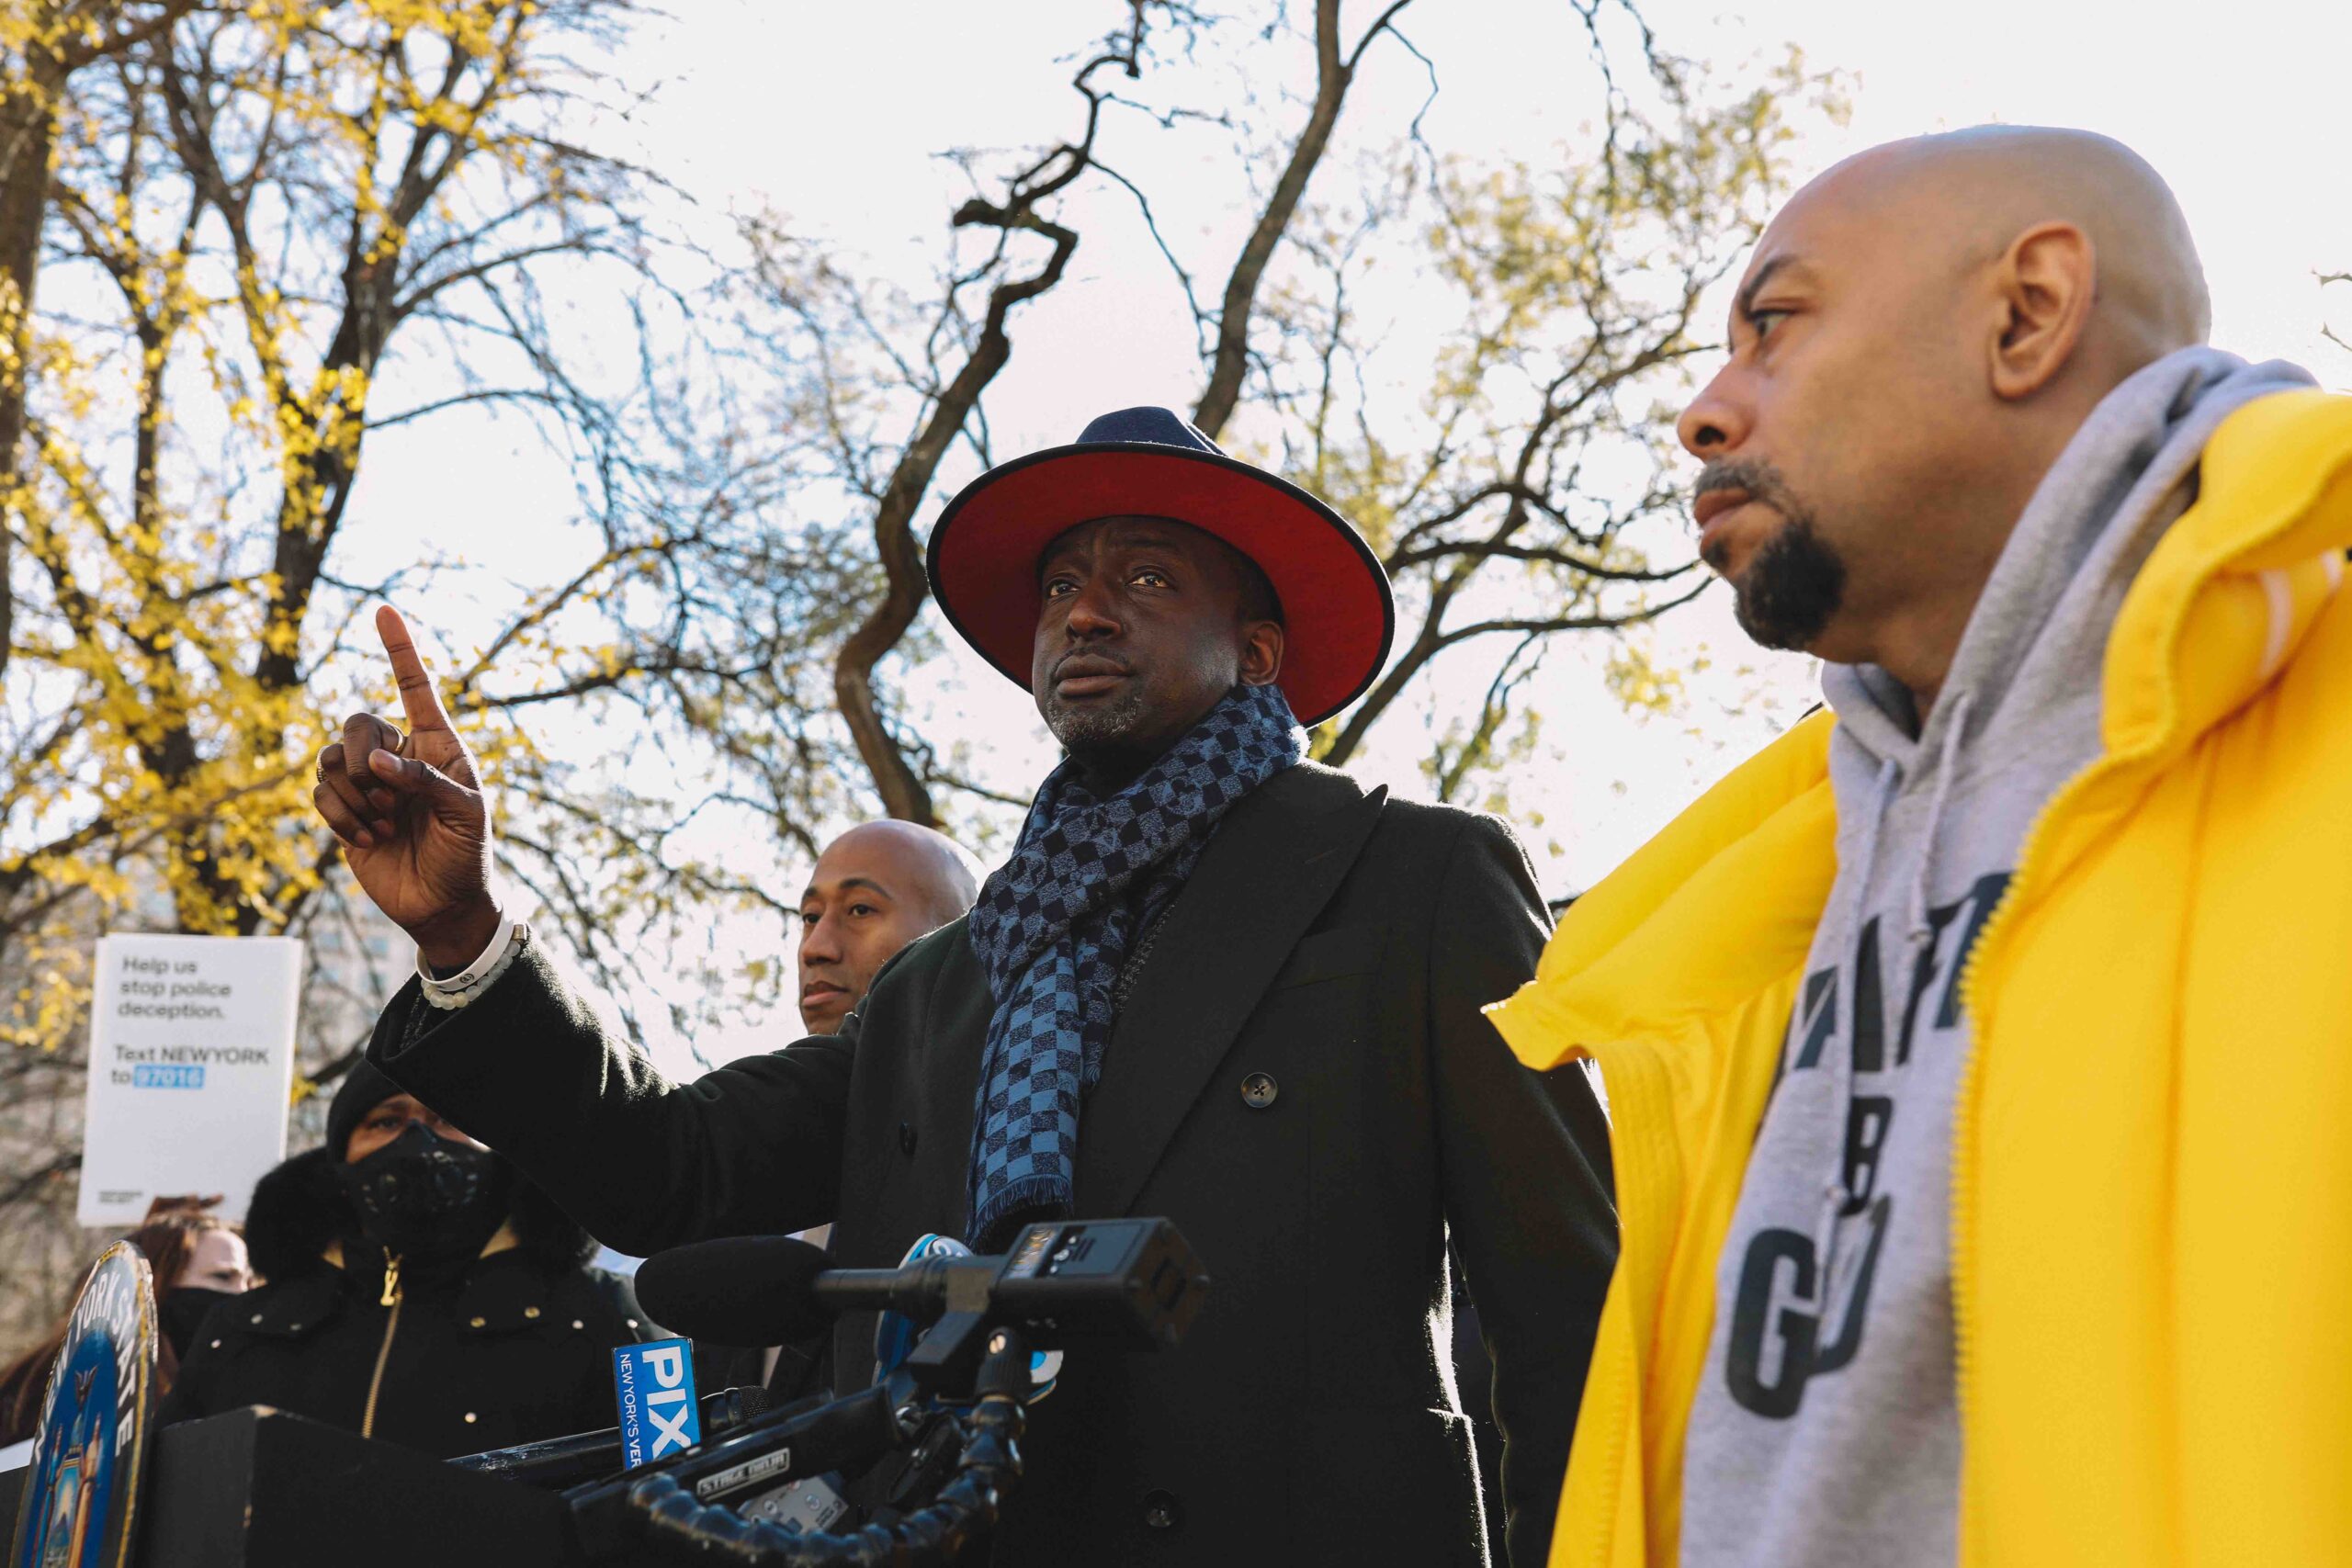 Yusef Salaam introducing the criminal justice package in New York on Dec. 14, 2021 in Central Park. (Image: Elijah Craig/Innocence Project)